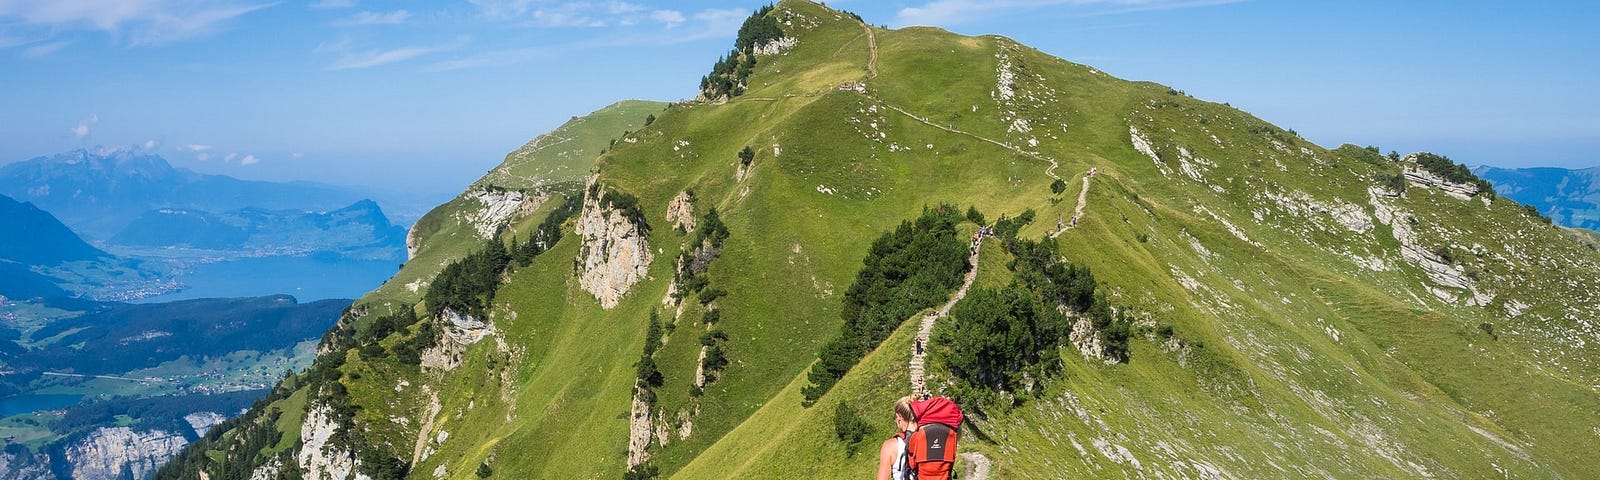 A woman with a red backpack going up a sinuous dirt mountain path, with more people higher above. The sides of the mountain are covered in grass and the clear blue sky is in the background.